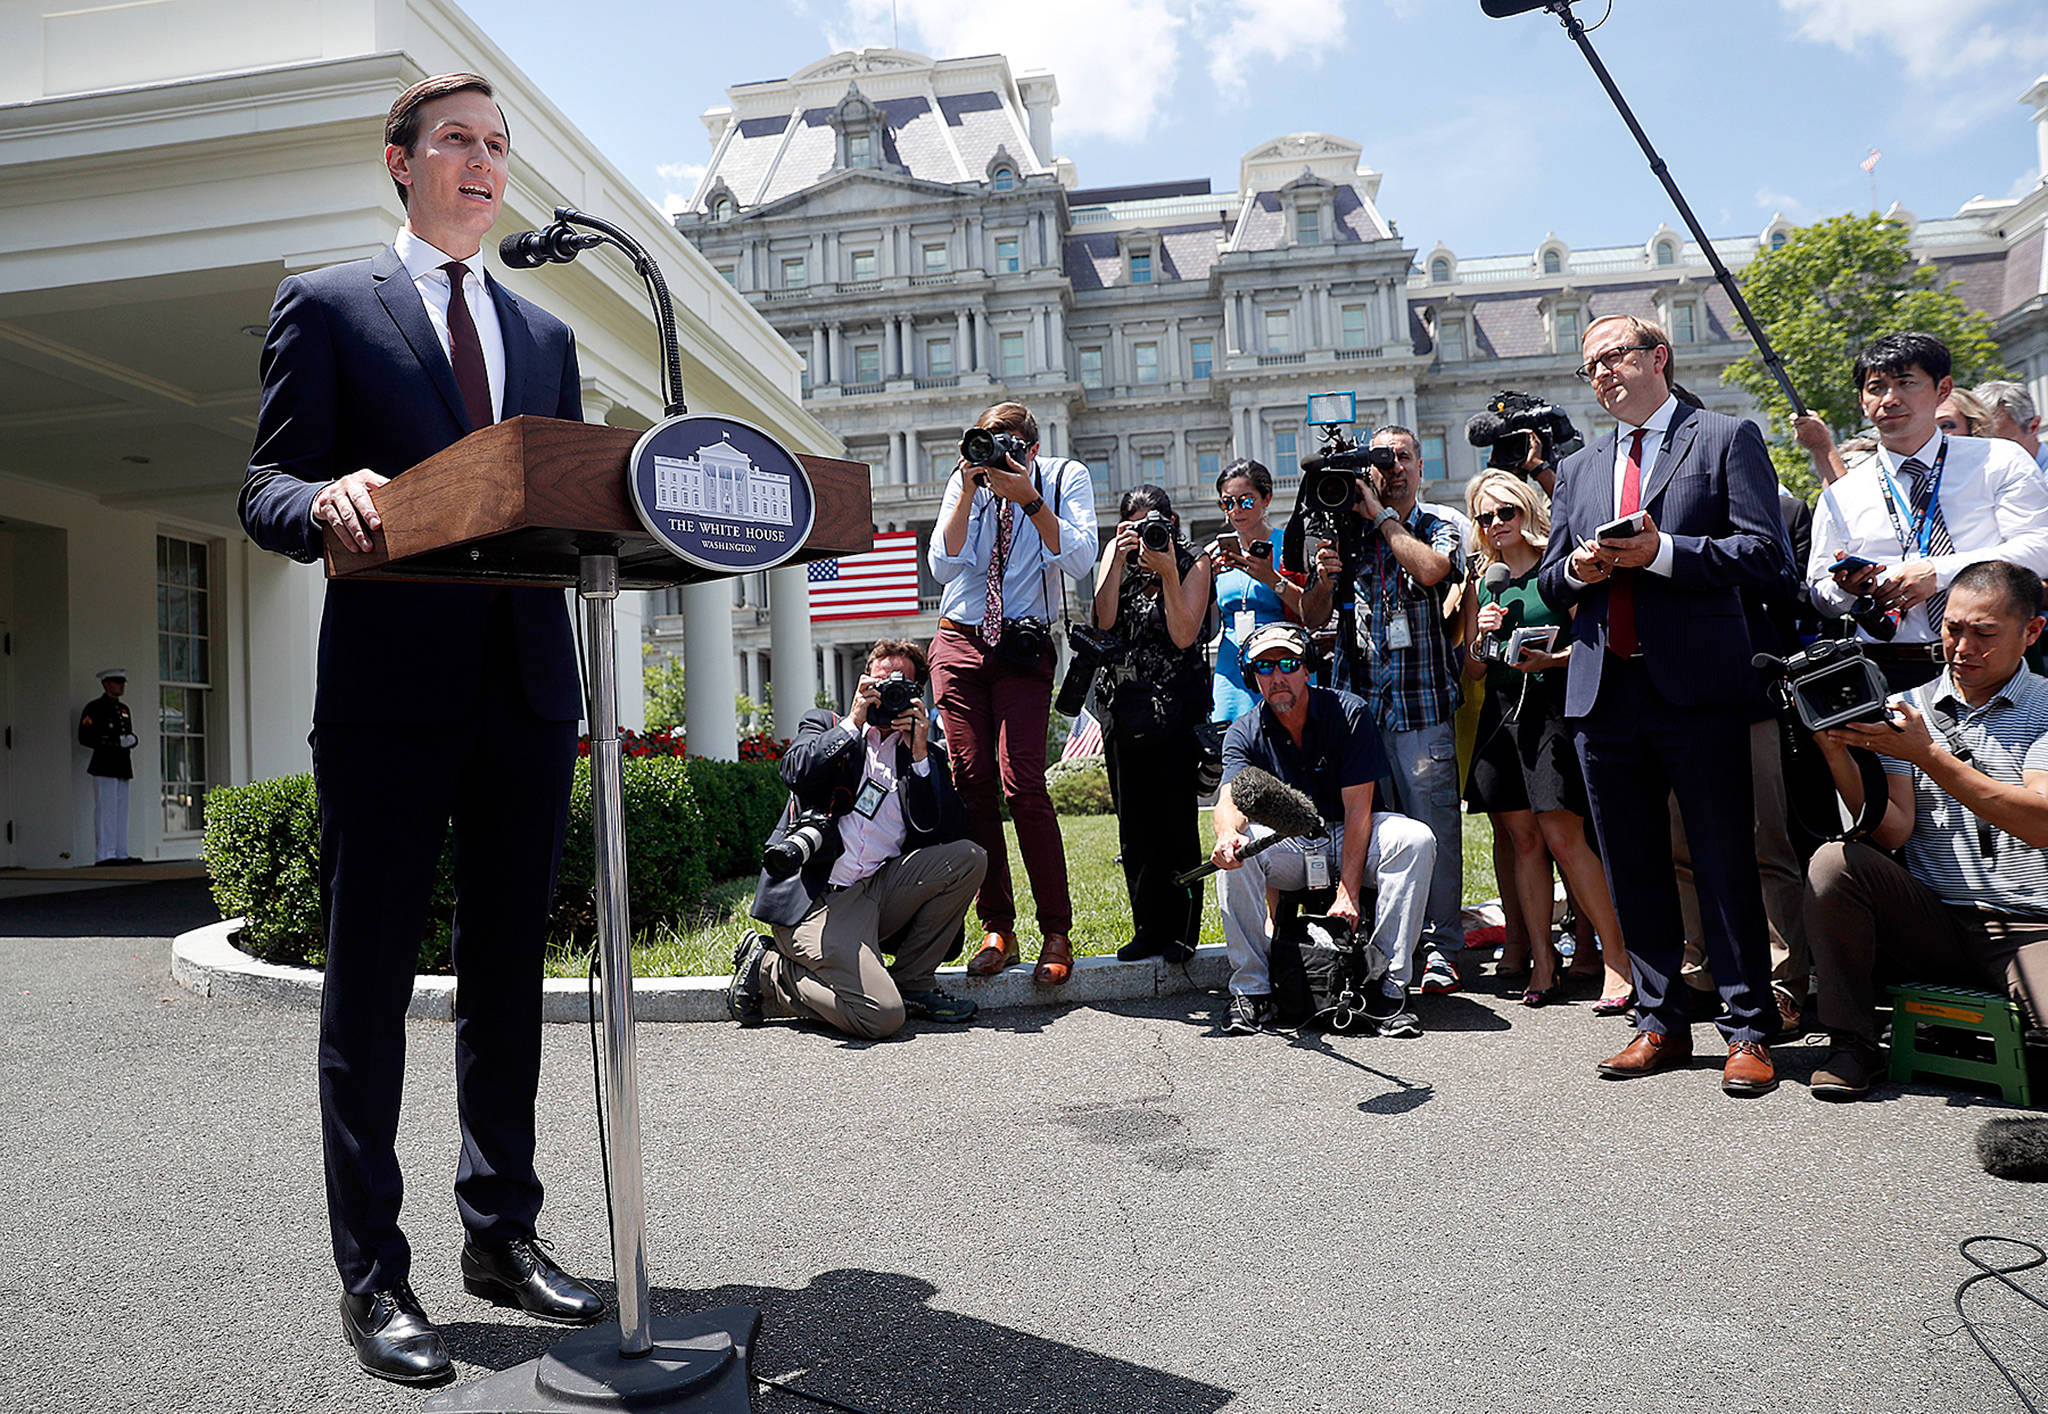 White House senior adviser Jared Kushner speaks to reporters outside the White House in Washington on Monday after meeting on Capitol Hill behind closed doors with the Senate Intelligence Committee. (AP Photo/Pablo Martinez Monsivais)